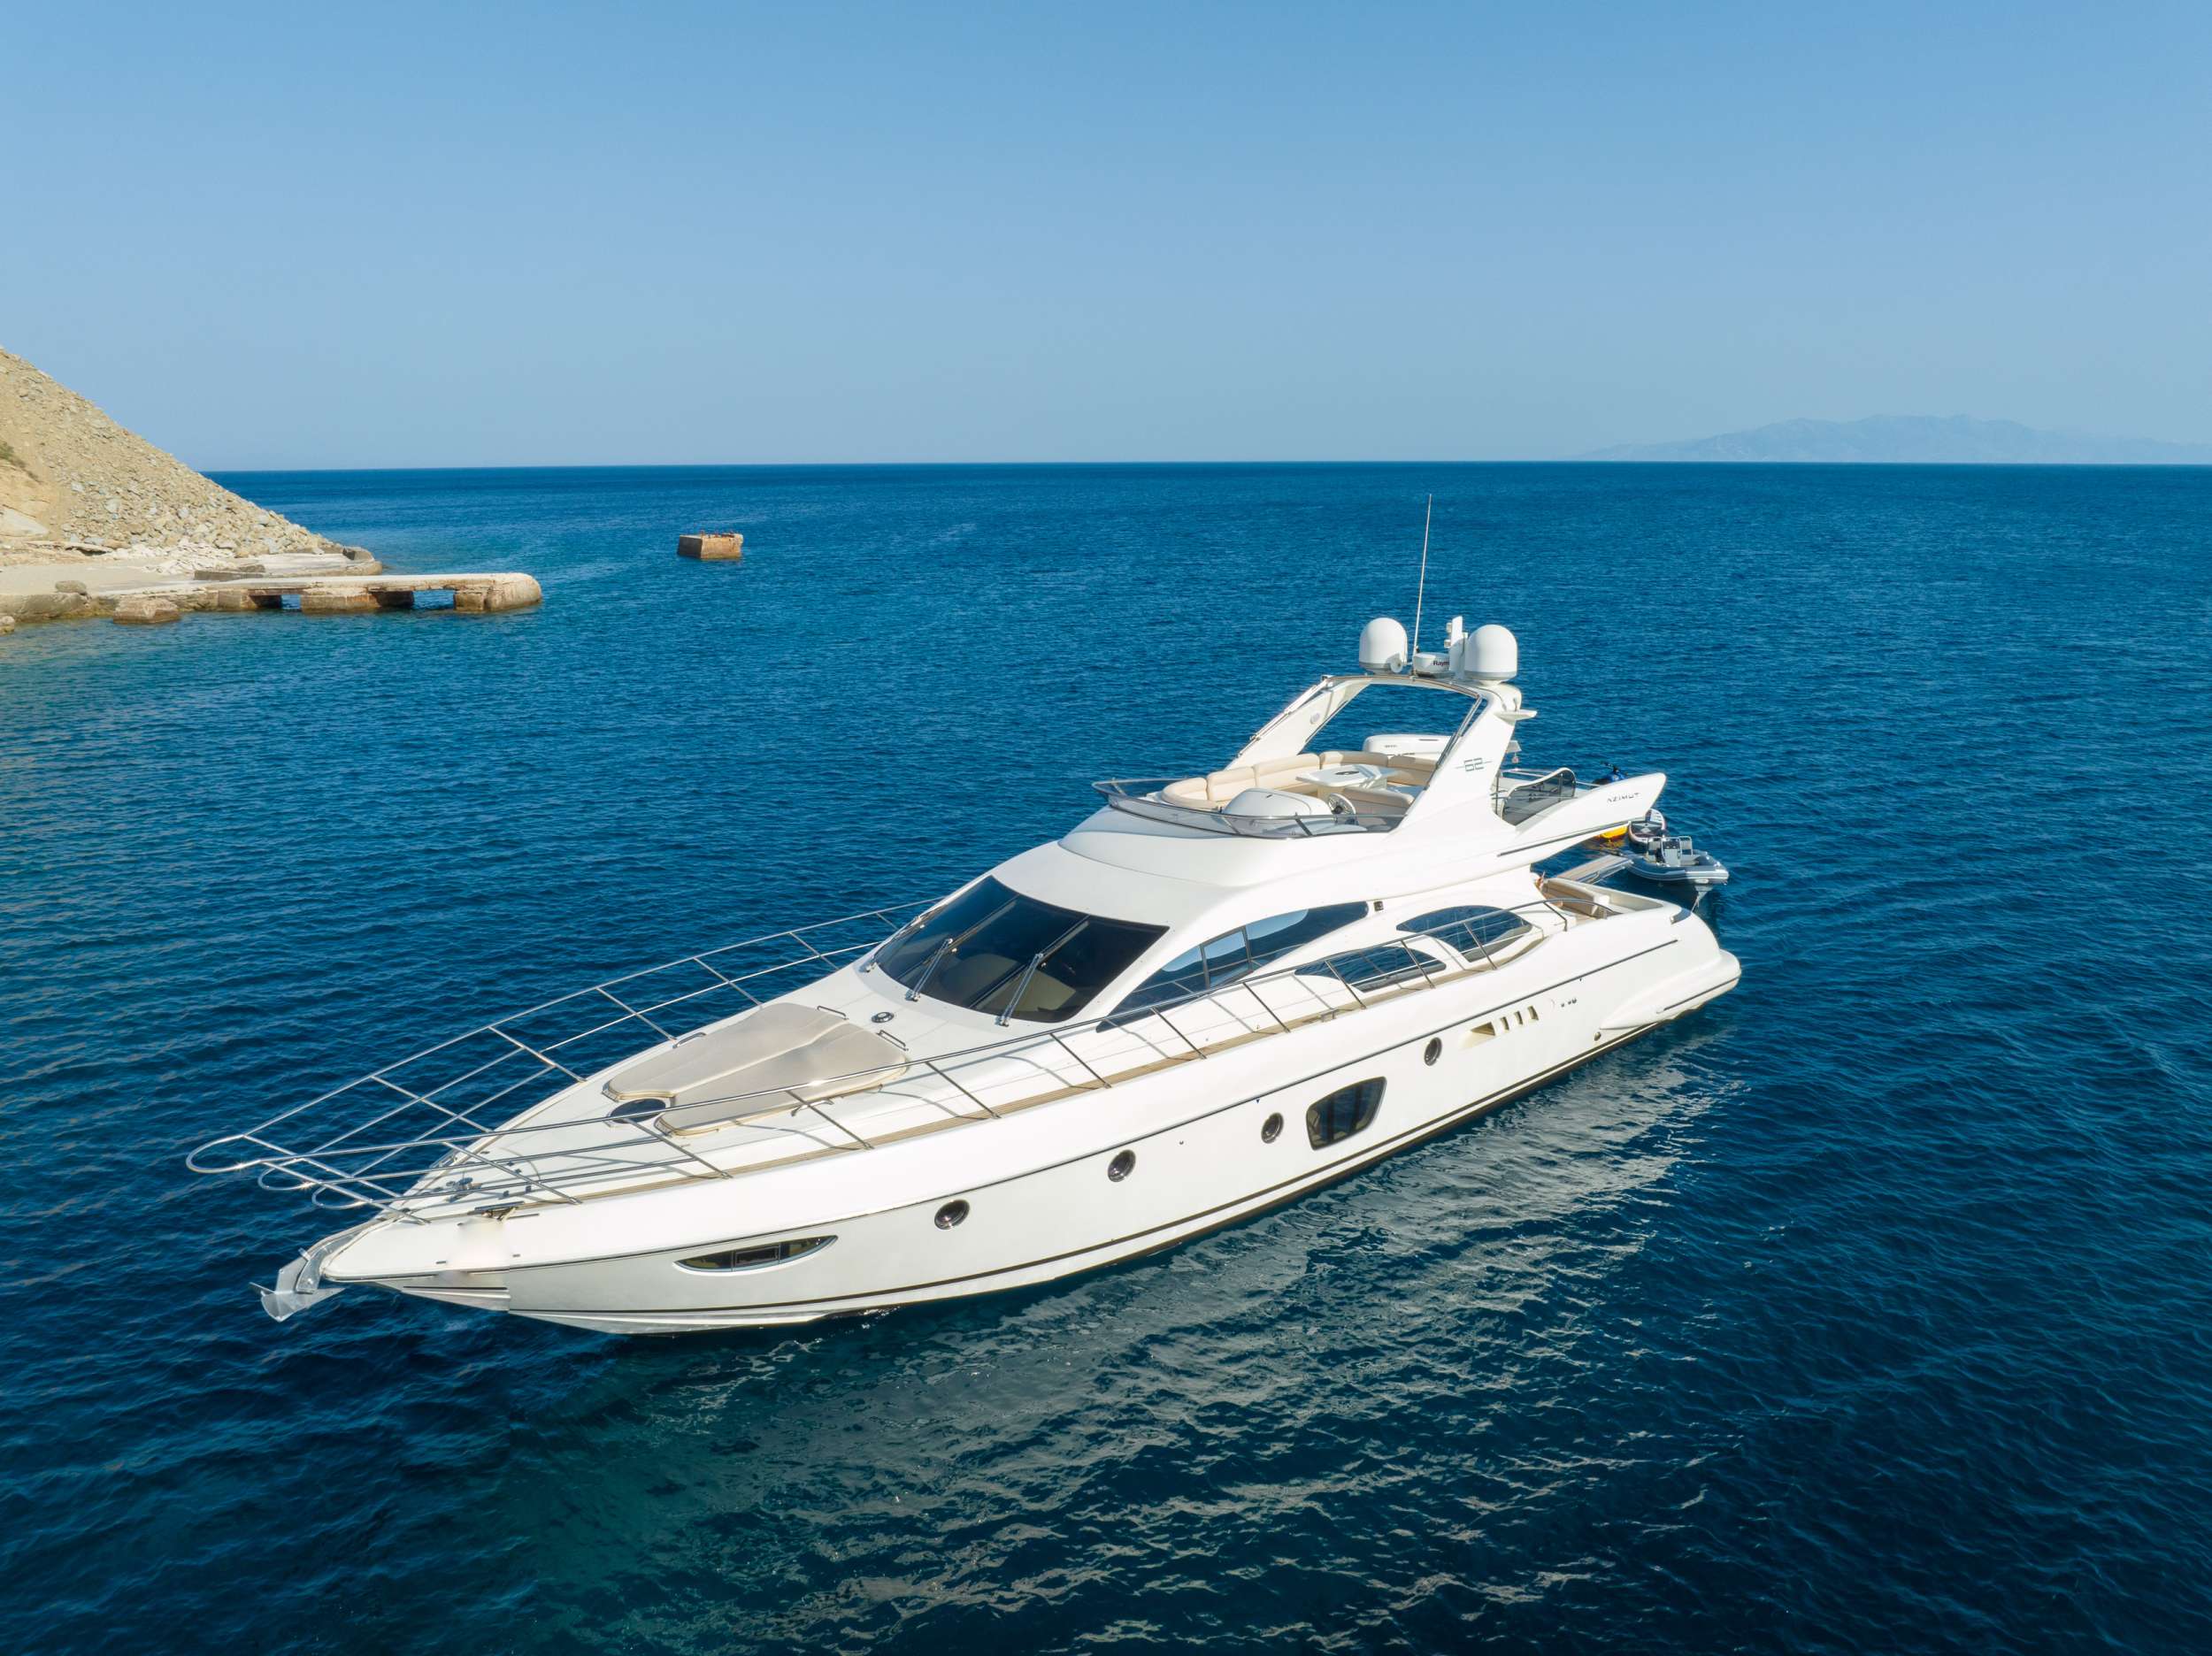 An Elegant &ldquo;Lady &rdquo; called &ldquo; Grace &rdquo; of 62 ft.
A renowned brand, of style &amp; high-quality standards, blending perfectly in the unique waters of the Aegean, where time is suspended, and your journey begins&hellip; She will tickle your senses whilst you enjoy her performance.